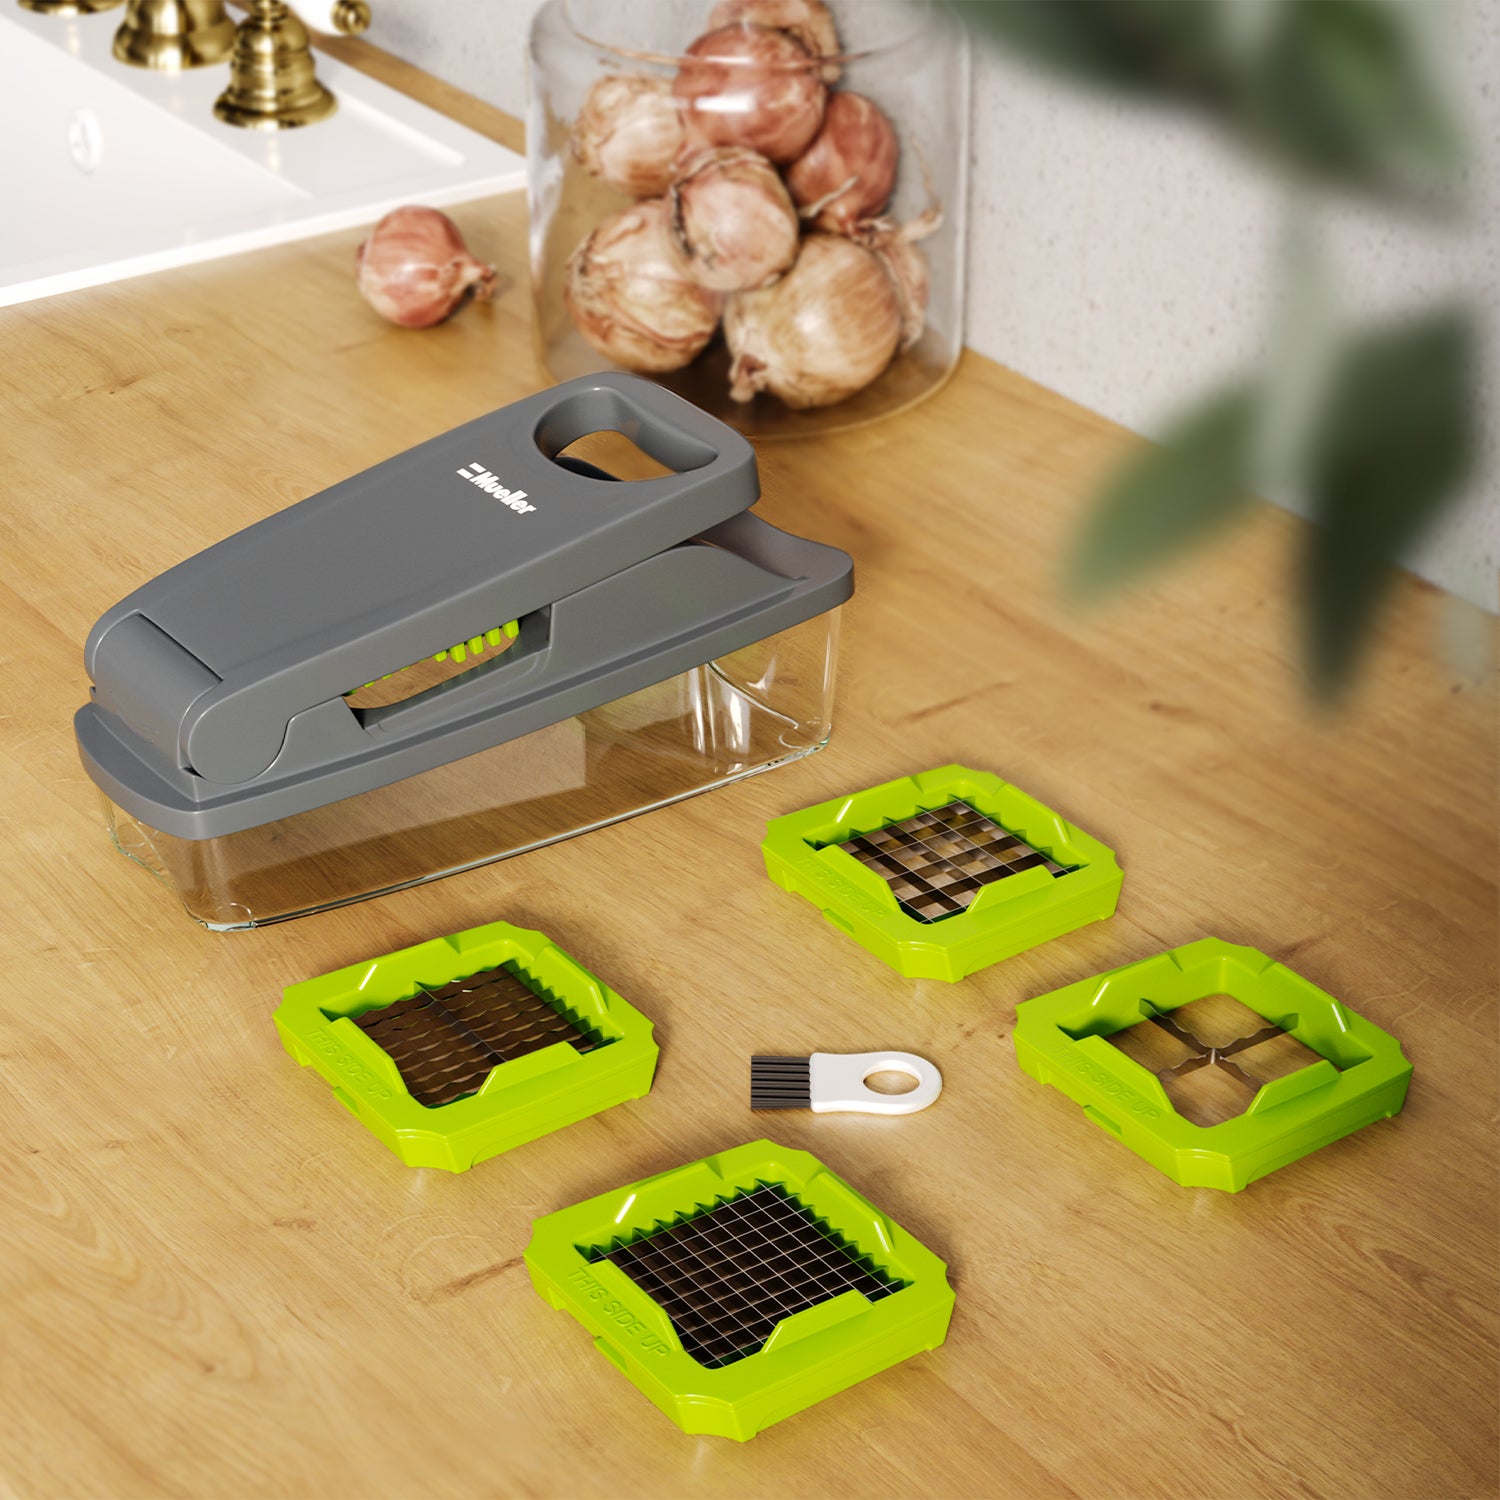 The Fullstar Vegetable Chopper is currently 40% off